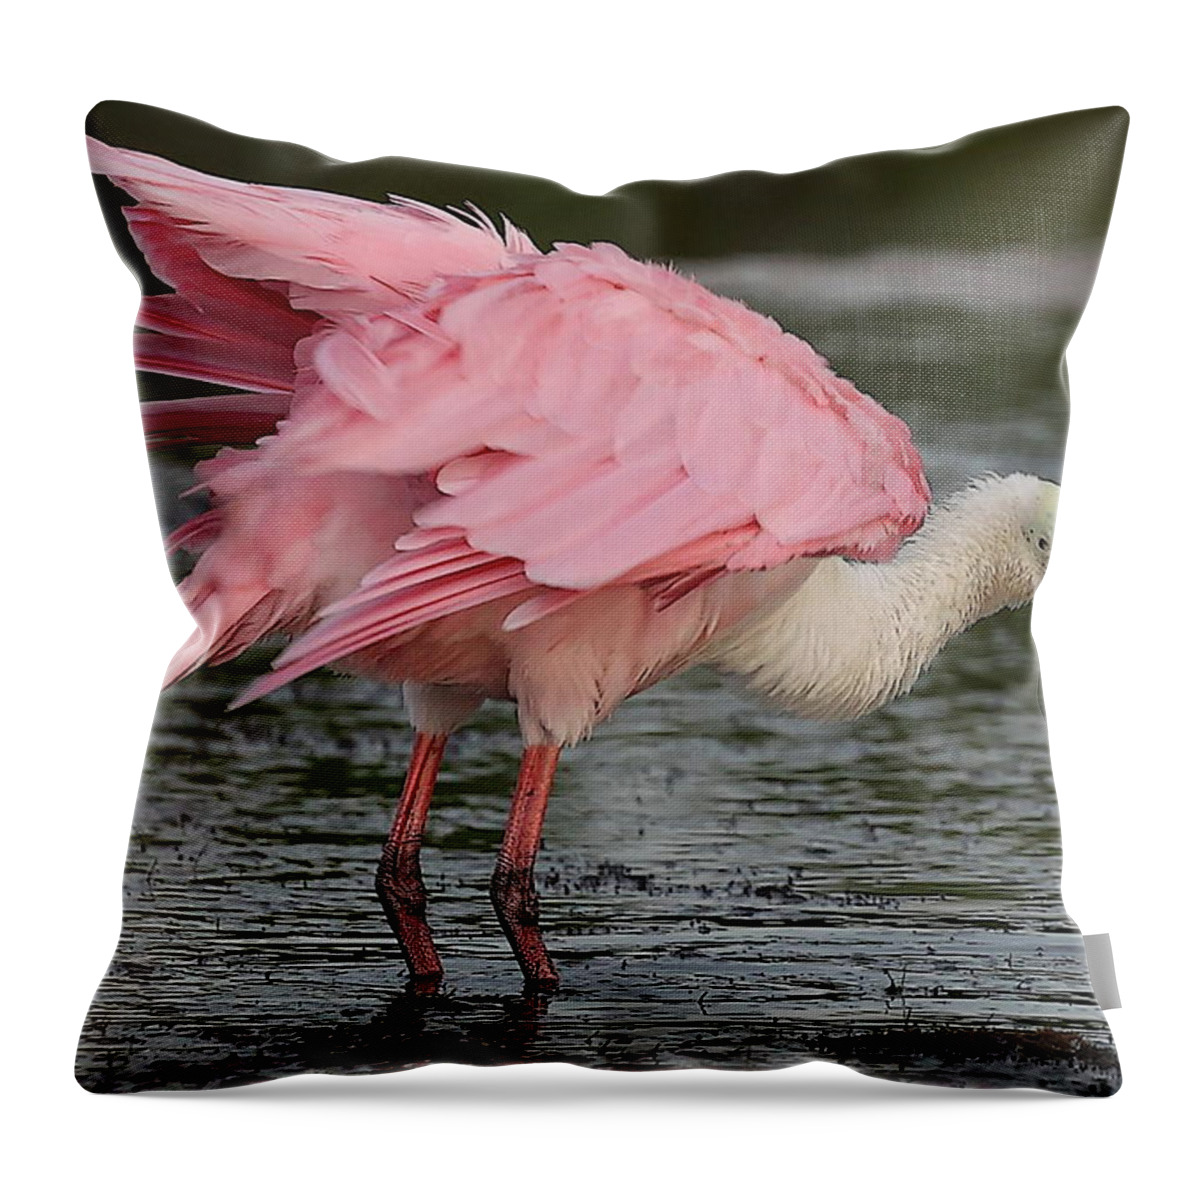 Roseate Spoonbill Throw Pillow featuring the photograph Roseate Spoonbill 14 by Mingming Jiang